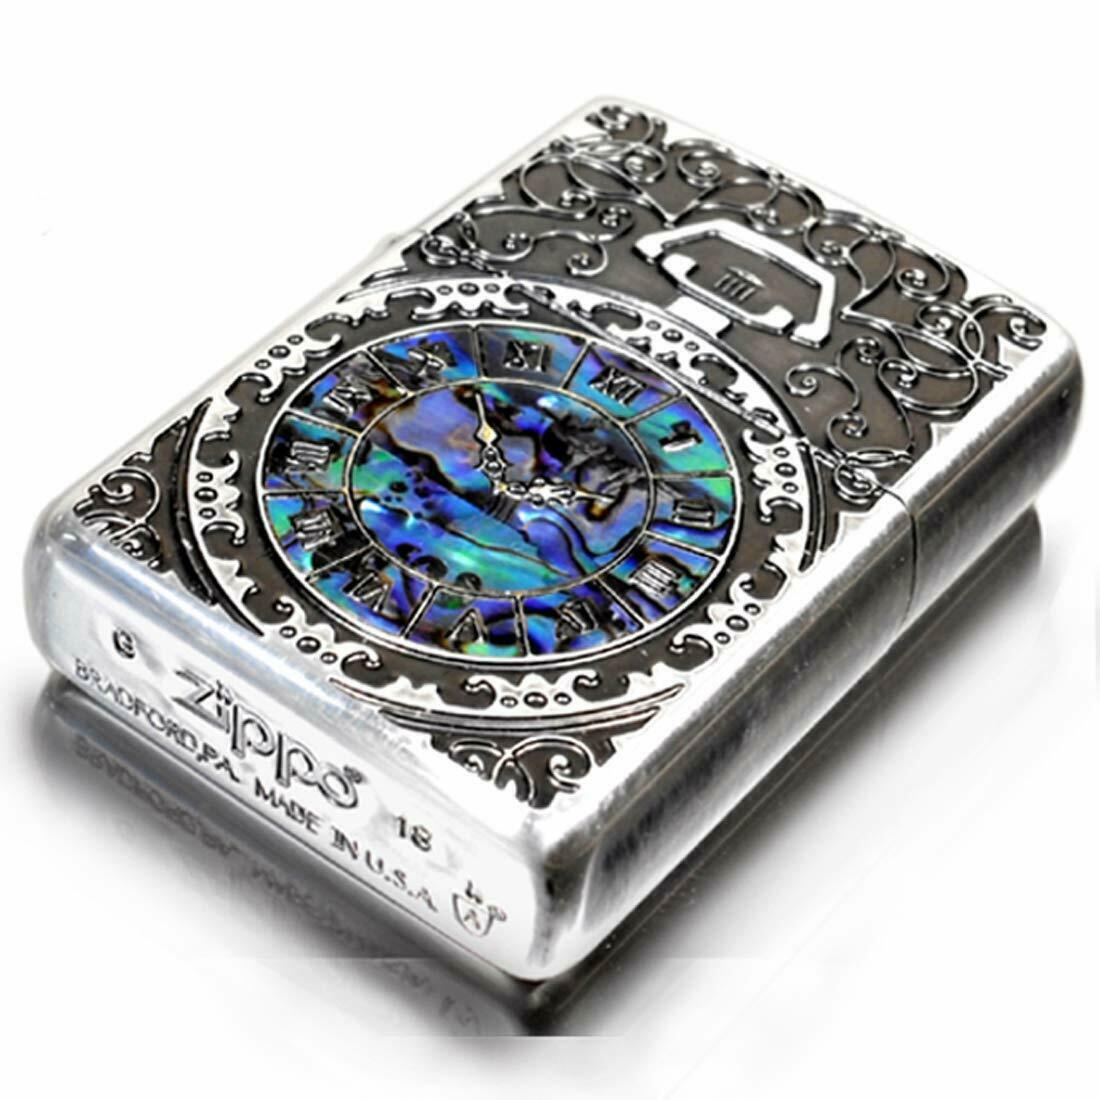 Zippo Armor Case Watch Arabesque Shell Inlay Both Sides Etching